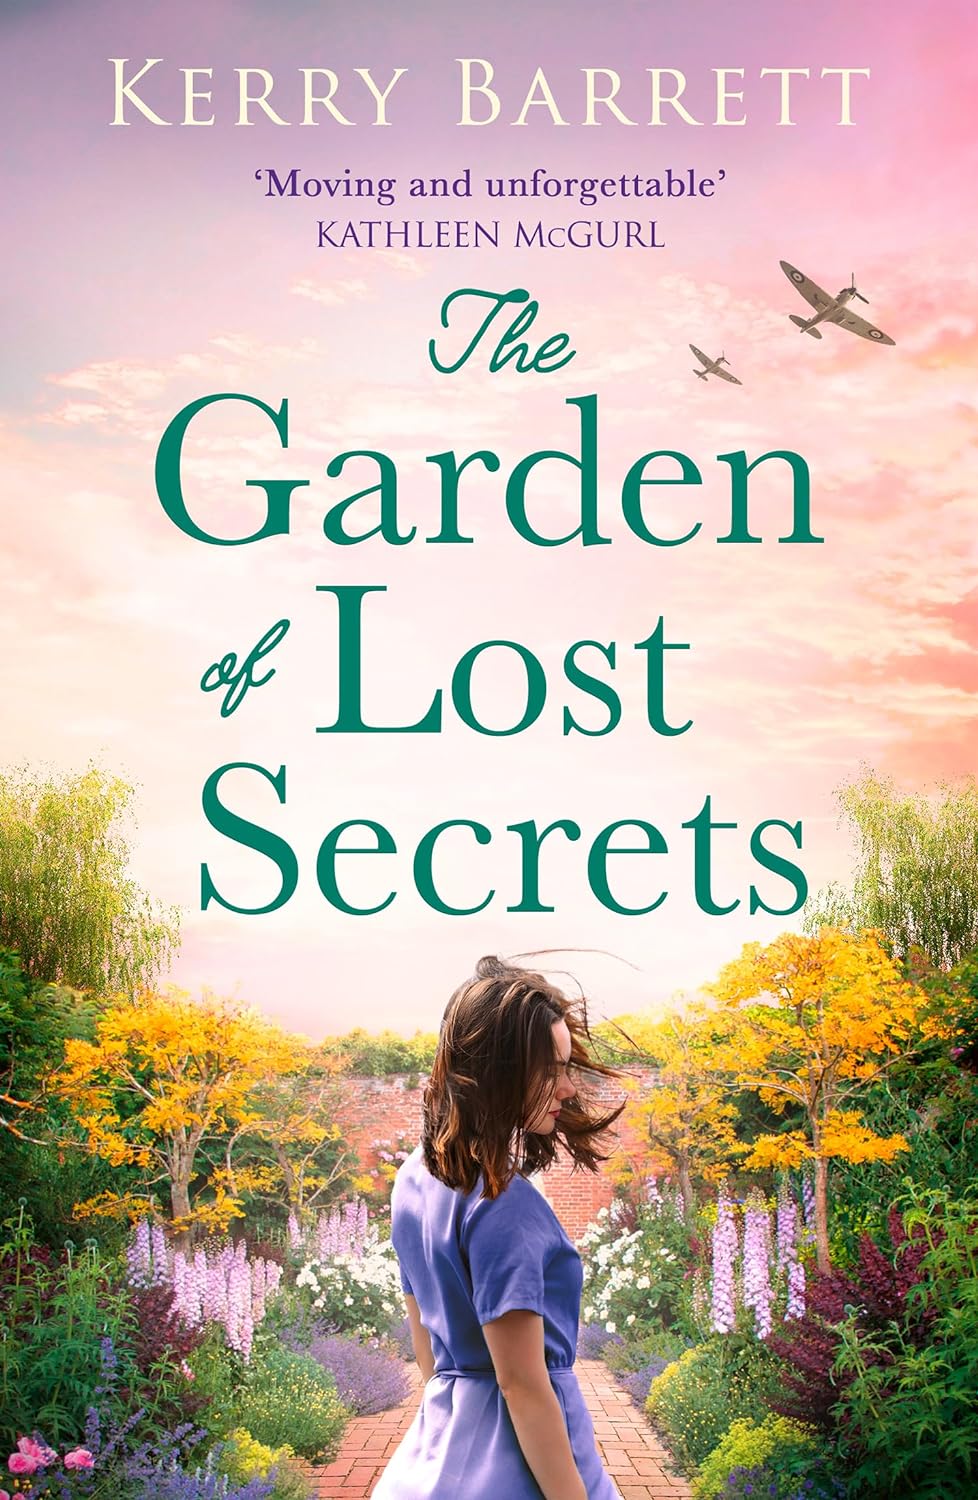 THe_Garden_lost_secrets_book_front_cover.